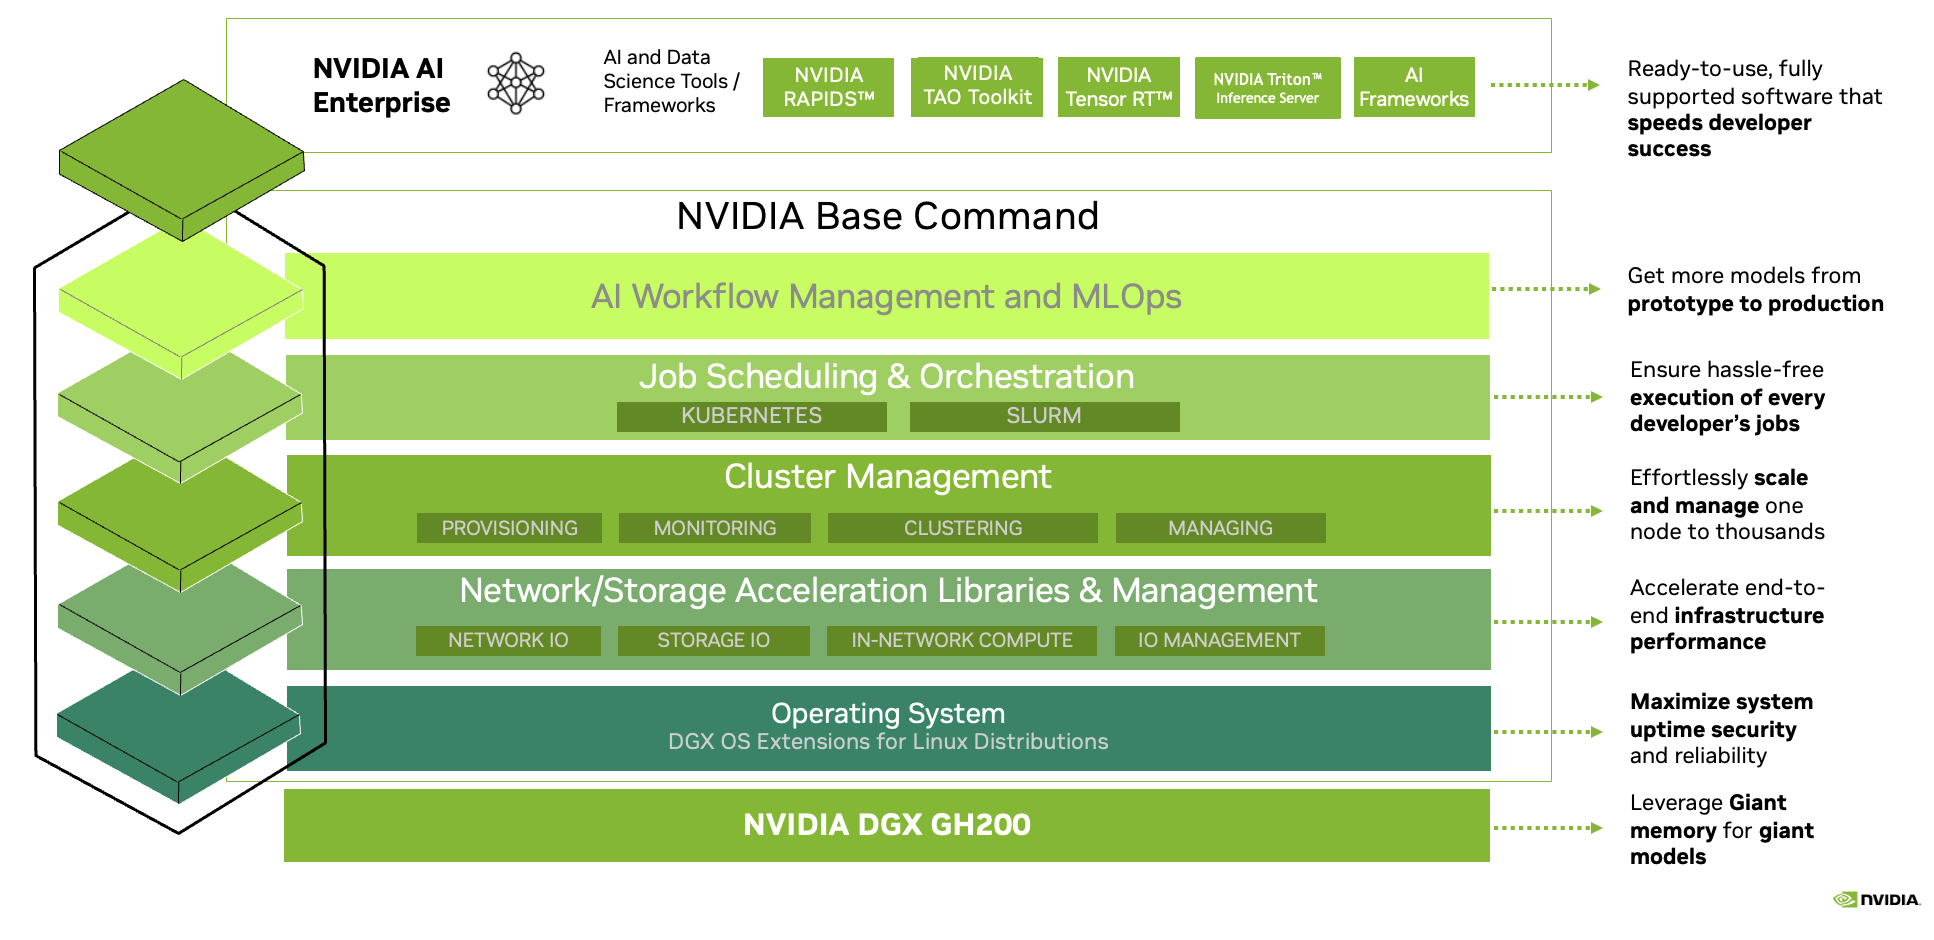 Diagram illustrates the full stack of software and software platforms that are included with the NVIDIA DGX GH200 AI supercomputer. The stack includes NVIDIA AI Enterprise software suite for developers, NVIDIA Base Command OS platform that includes AI workflow management, enterprise-grade cluster management, libraries that accelerate compute, storage, and network infrastructure, and system software optimized for running AI workloads.